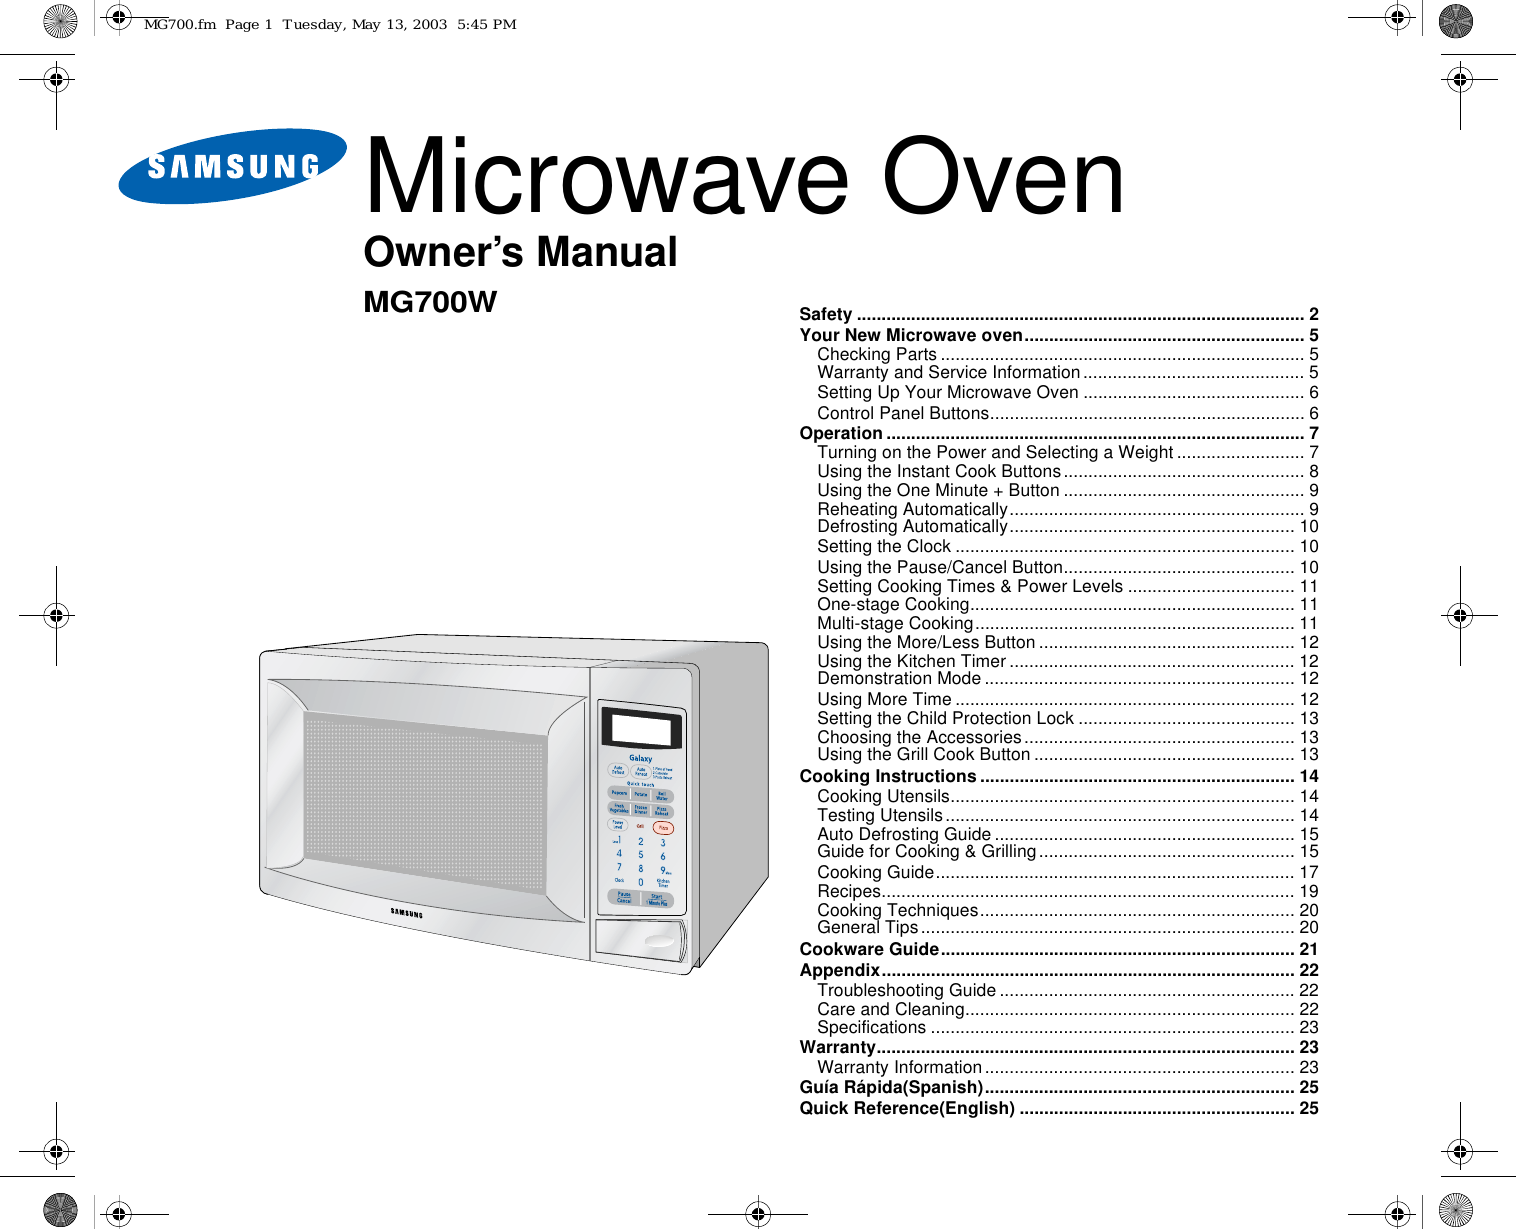 Microwave OvenOwner’s ManualMG700W Safety ........................................................................................... 2Your New Microwave oven......................................................... 5Checking Parts .......................................................................... 5Warranty and Service Information............................................. 5Setting Up Your Microwave Oven ............................................. 6Control Panel Buttons................................................................ 6Operation ..................................................................................... 7Turning on the Power and Selecting a Weight .......................... 7Using the Instant Cook Buttons................................................. 8Using the One Minute + Button ................................................. 9Reheating Automatically............................................................ 9Defrosting Automatically.......................................................... 10Setting the Clock ..................................................................... 10Using the Pause/Cancel Button............................................... 10Setting Cooking Times &amp; Power Levels .................................. 11One-stage Cooking.................................................................. 11Multi-stage Cooking................................................................. 11Using the More/Less Button .................................................... 12Using the Kitchen Timer .......................................................... 12Demonstration Mode ............................................................... 12Using More Time ..................................................................... 12Setting the Child Protection Lock ............................................ 13Choosing the Accessories....................................................... 13Using the Grill Cook Button ..................................................... 13Cooking Instructions ................................................................ 14Cooking Utensils...................................................................... 14Testing Utensils....................................................................... 14Auto Defrosting Guide ............................................................. 15Guide for Cooking &amp; Grilling.................................................... 15Cooking Guide......................................................................... 17Recipes.................................................................................... 19Cooking Techniques................................................................ 20General Tips............................................................................ 20Cookware Guide........................................................................ 21Appendix.................................................................................... 22Troubleshooting Guide ............................................................ 22Care and Cleaning................................................................... 22Specifications .......................................................................... 23Warranty..................................................................................... 23Warranty Information............................................................... 23Guía Rápida(Spanish)............................................................... 25Quick Reference(English) ........................................................ 25MG700.fm  Page 1  Tuesday, May 13, 2003  5:45 PM